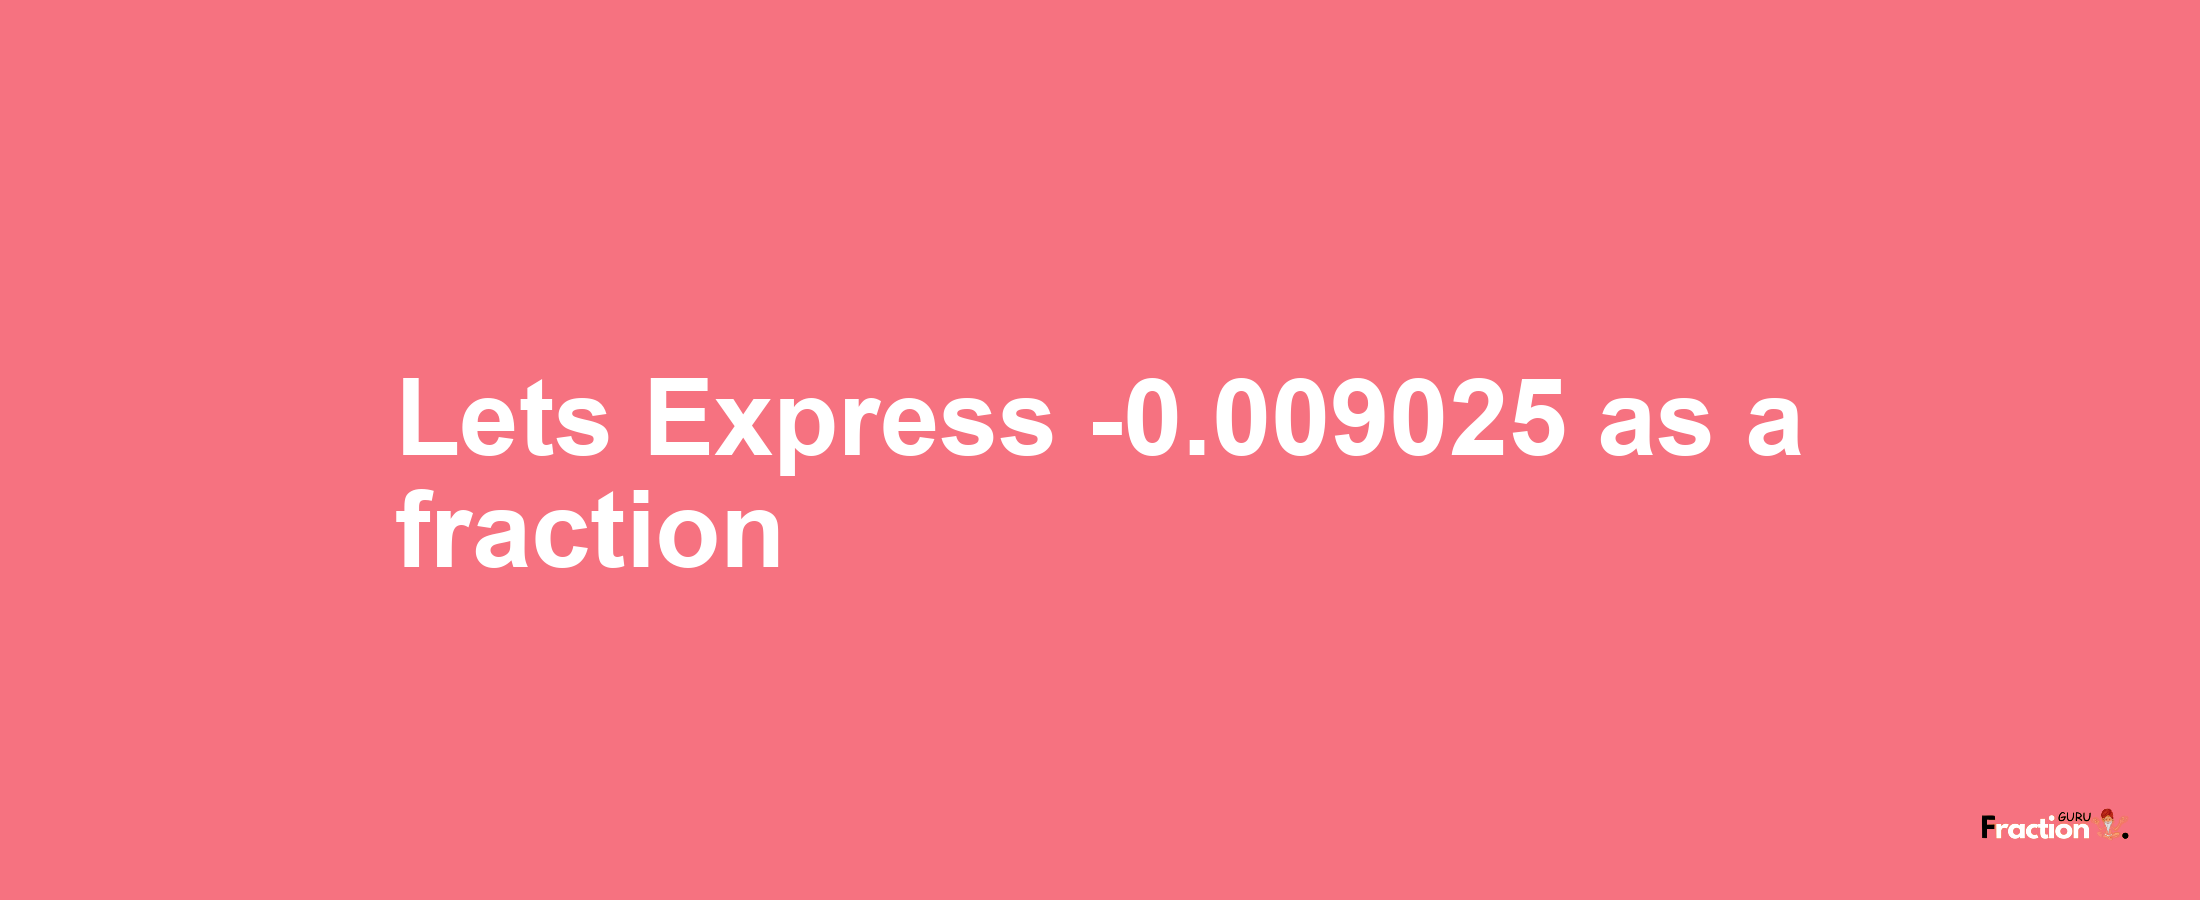 Lets Express -0.009025 as afraction